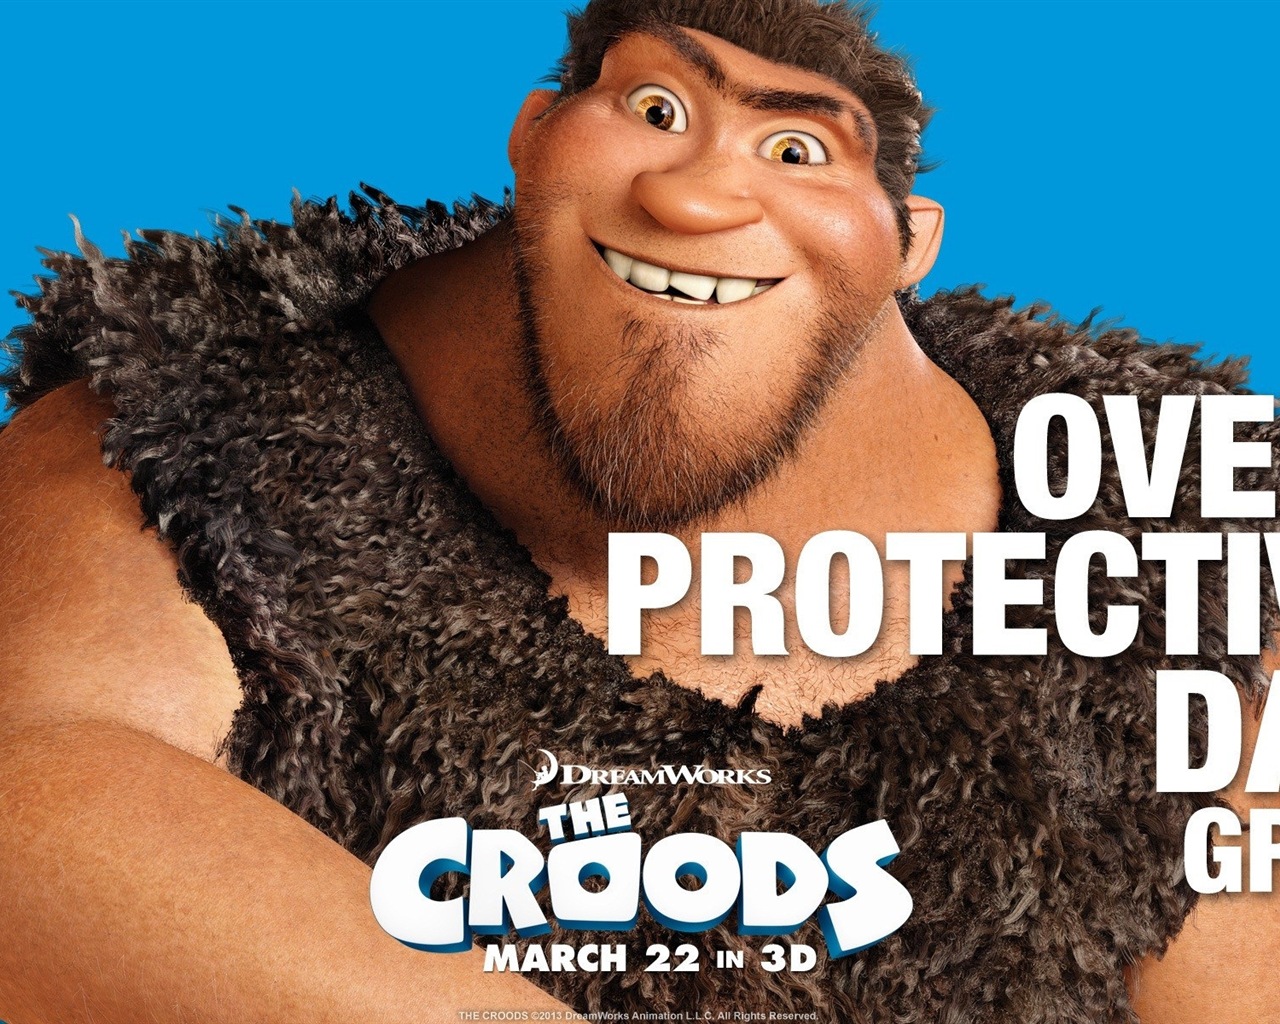 The Croods HD movie wallpapers #11 - 1280x1024